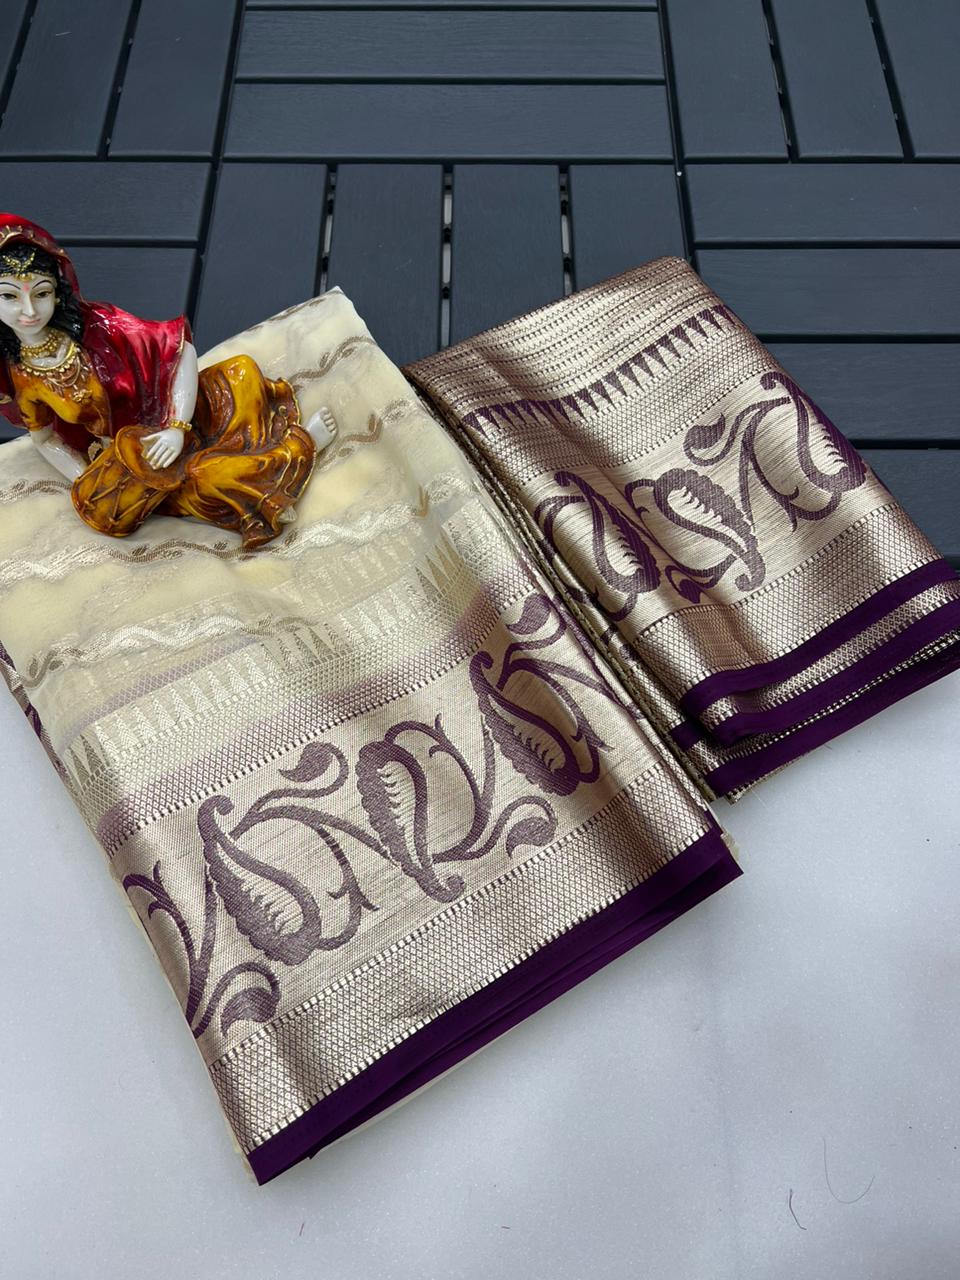 Pure Viscose Georgette Sari With lining Weaving in Full Sari and Jacquard Border Weave in Full Sari and Running Blouse